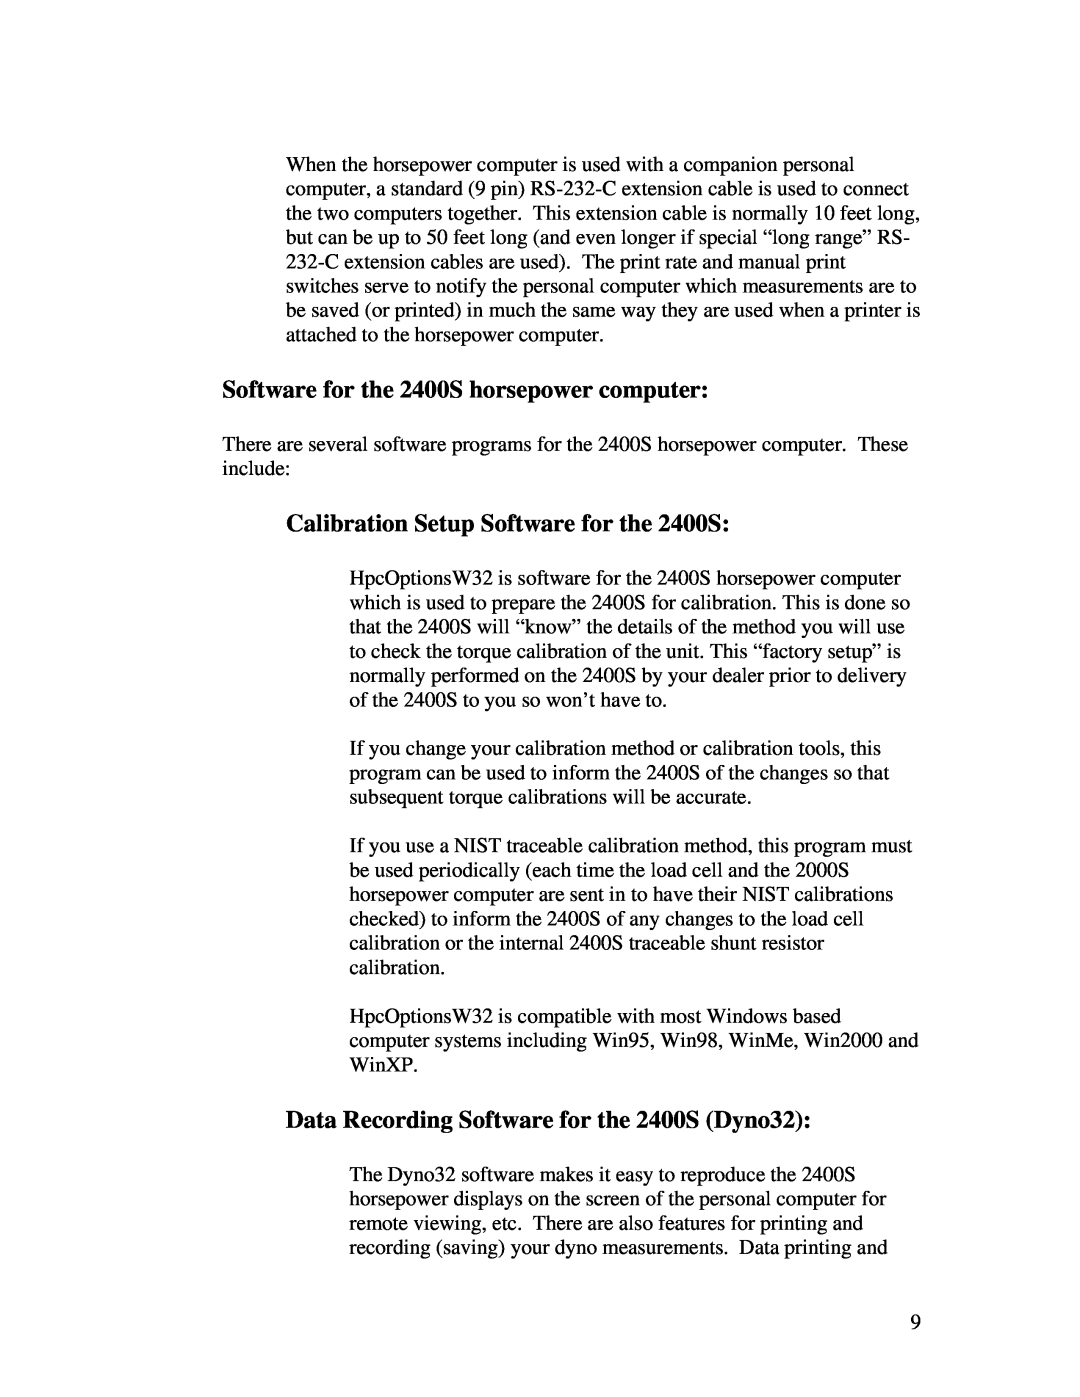 Powerware ST-2400S user manual Software for the 2400S horsepower computer, Calibration Setup Software for the 2400S 